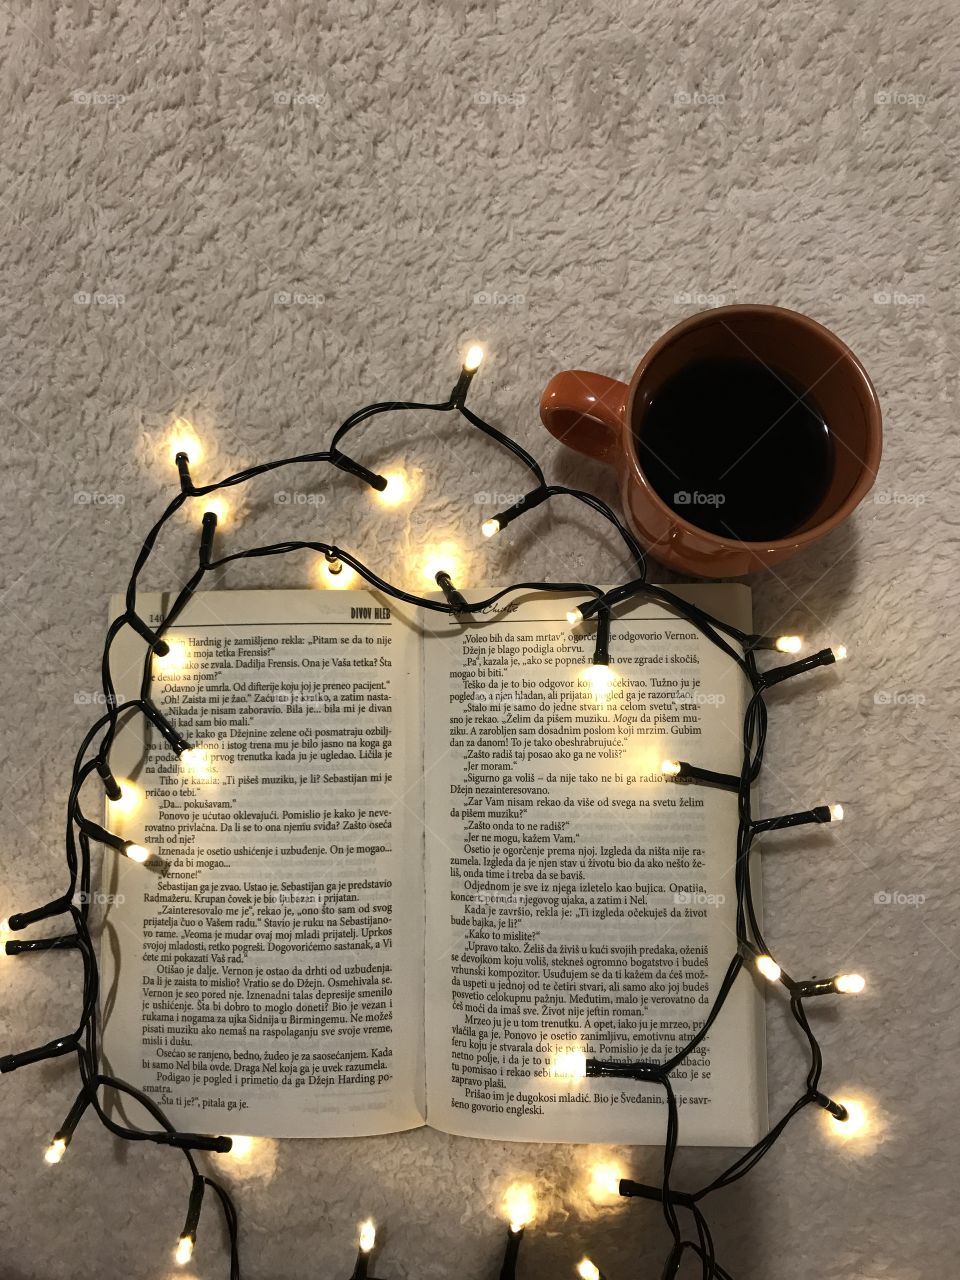 Look from up above onto the opened book, yellow Christmas lights, and a warm, orange cup of coffee.